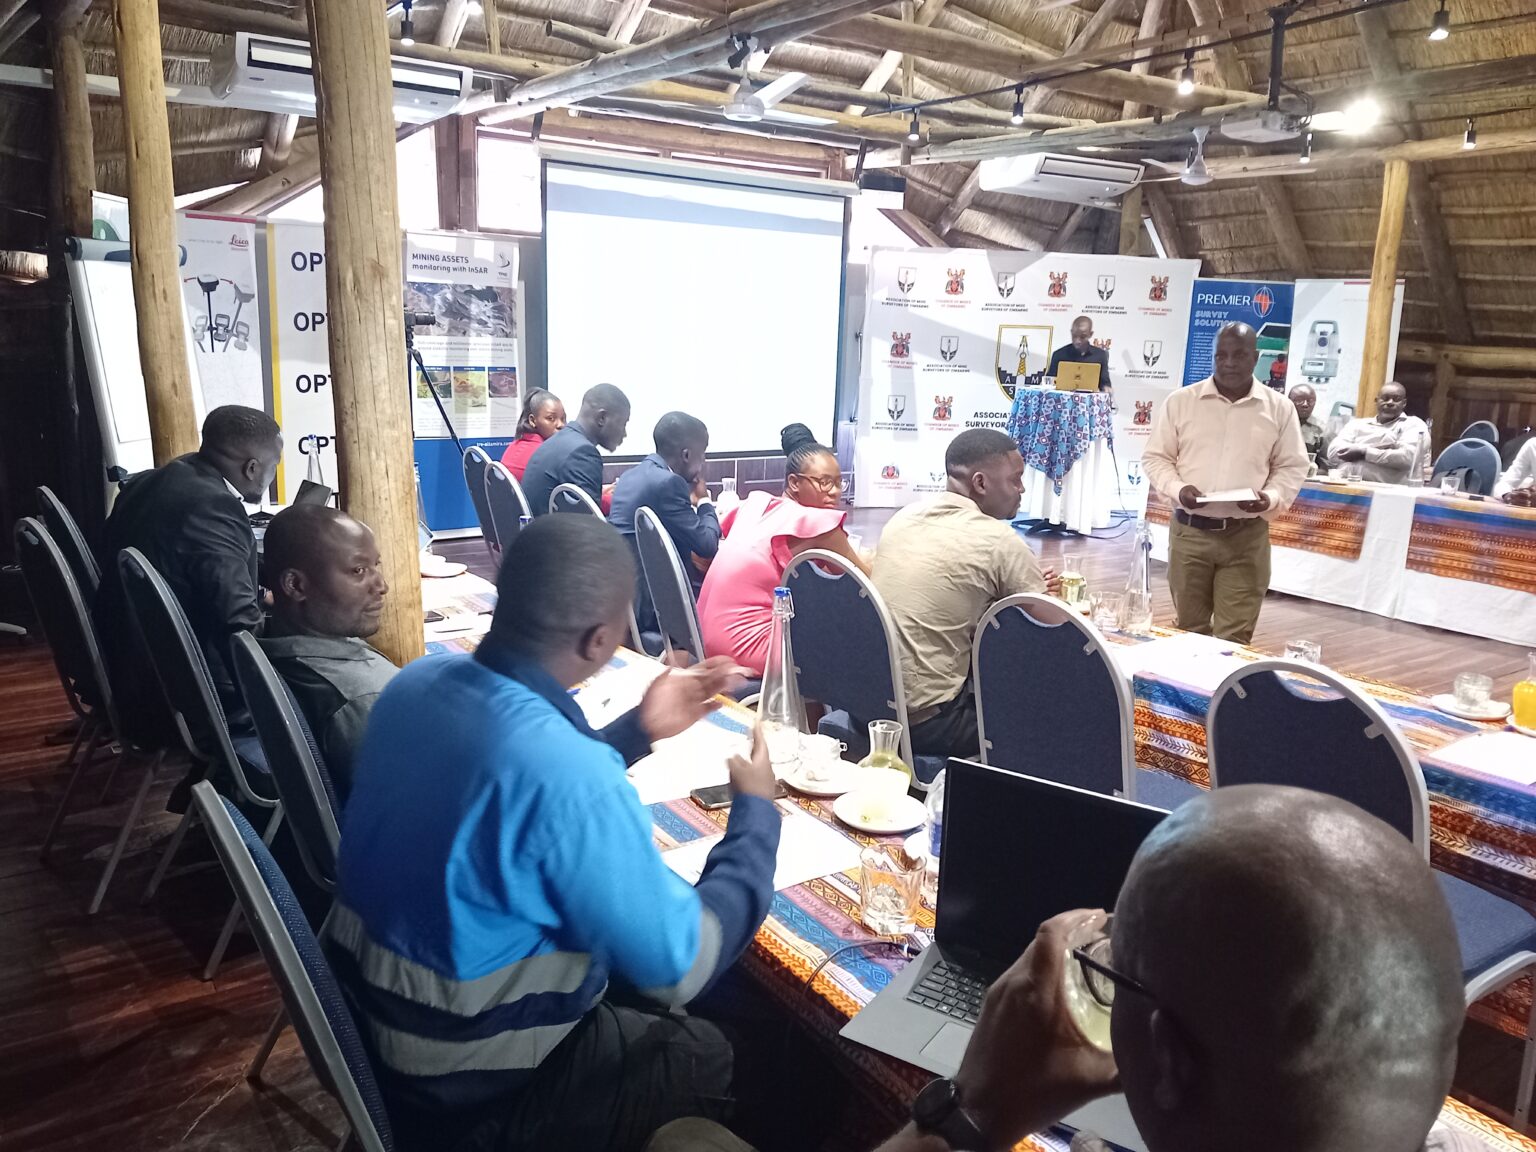 The Association of Mines Surveyors of Zimbabwe (AMSZ) AGM and Conference roars to life